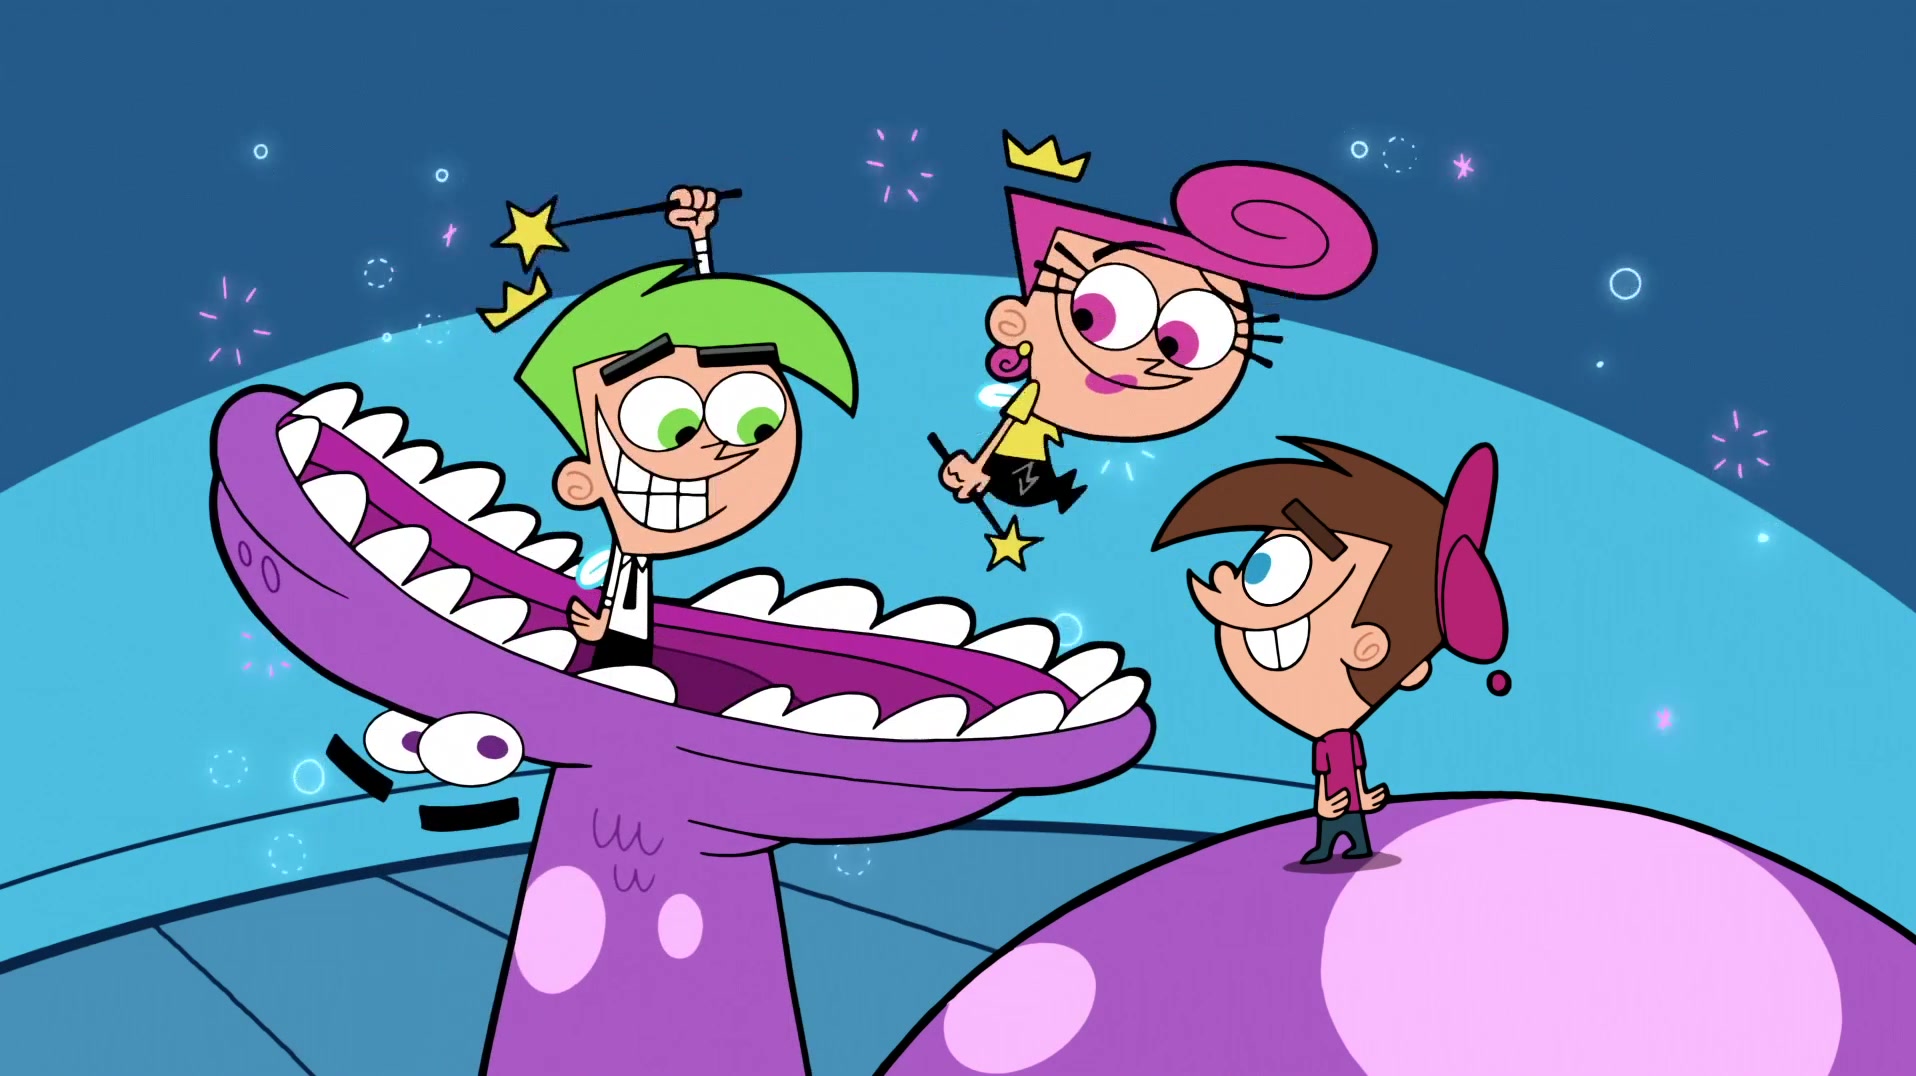 Image Newfopintro39jpg Fairly Odd Parents Wiki Timmy Turner And.